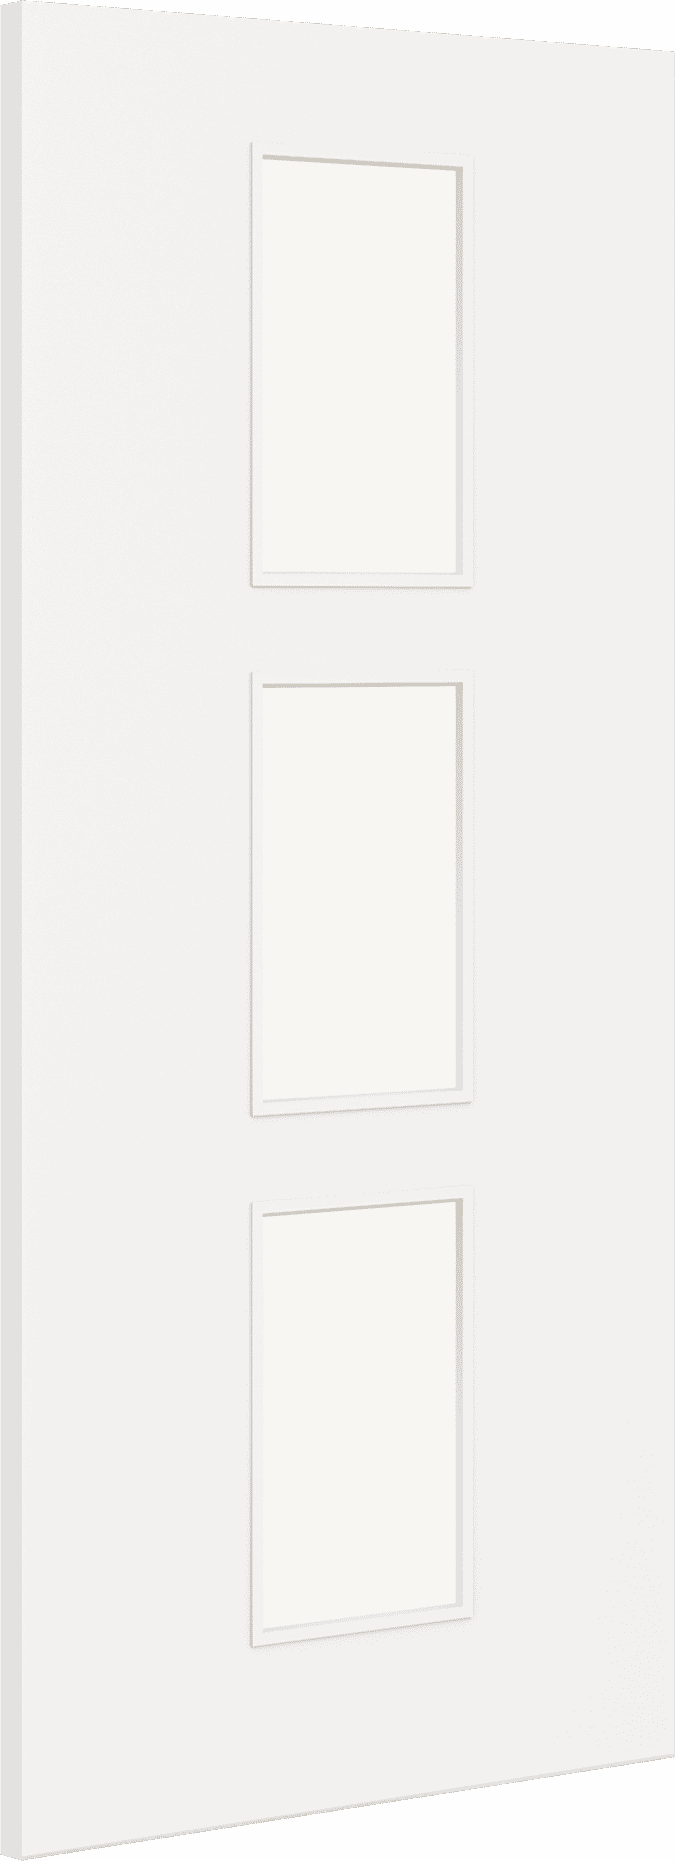 1981mm x 762mm x 44mm (30") Architectural Paint Grade White 11 Frosted Glazed Fire Door Blank